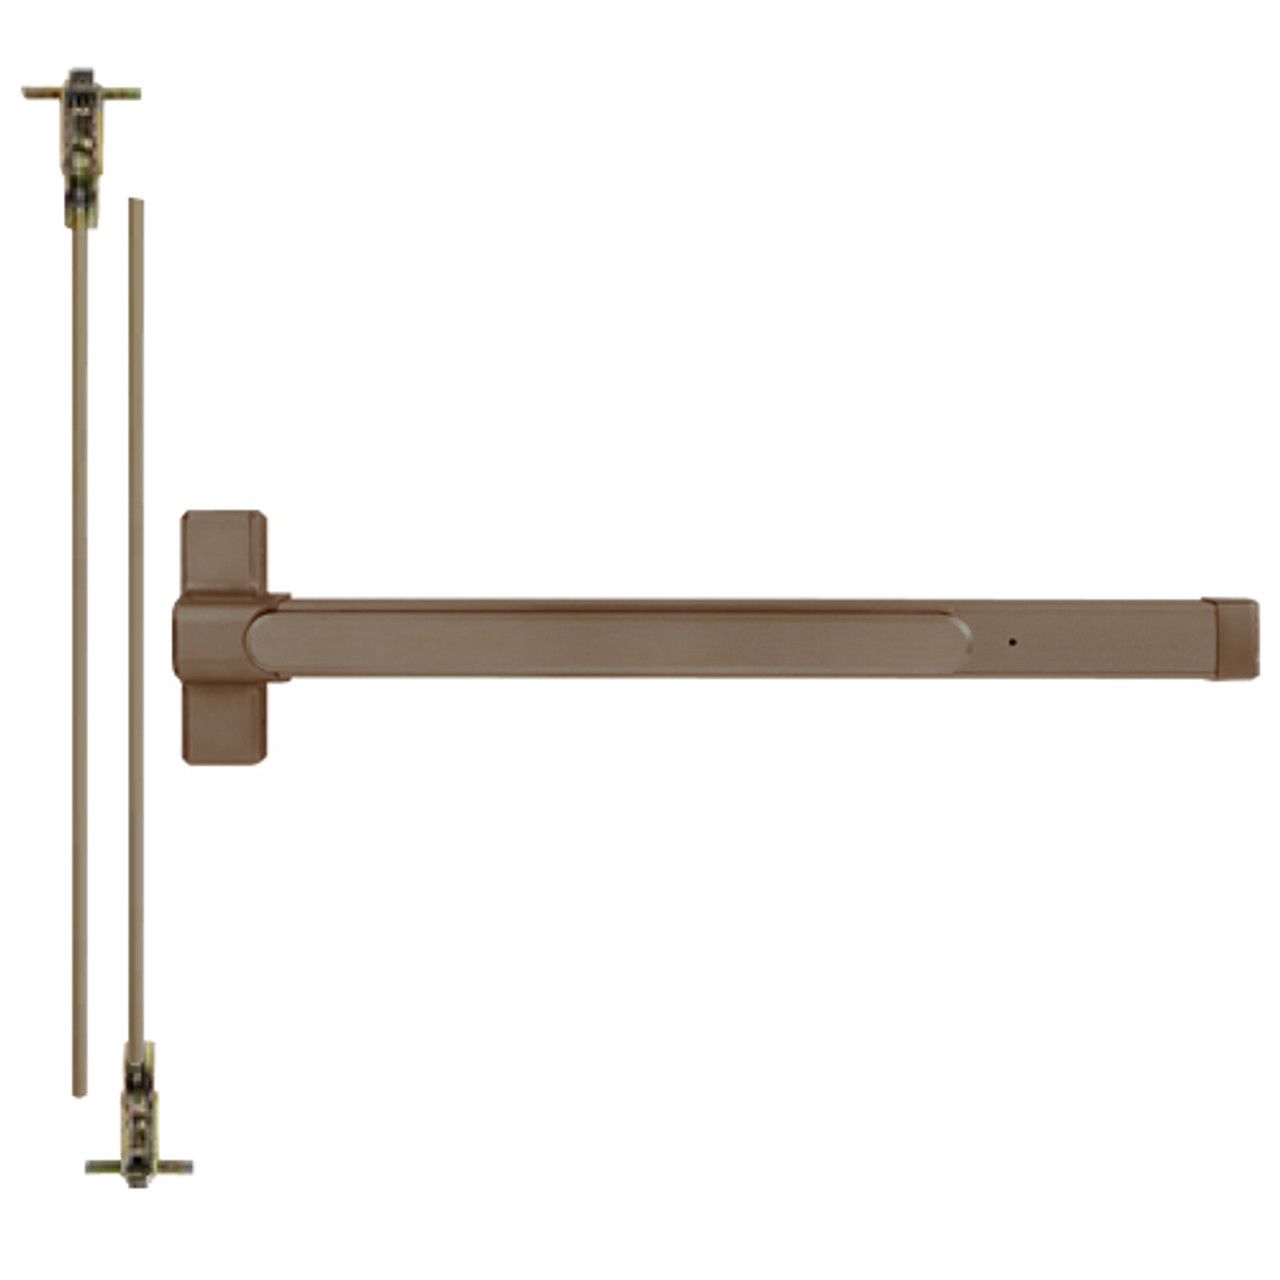 QED125X-36-7-313AN-LC Stanley QED100 Series Heavy Duty Concealed Vertical Rod Cylinder Dog Exit Device in Anodized Duranodic Bronze Finish